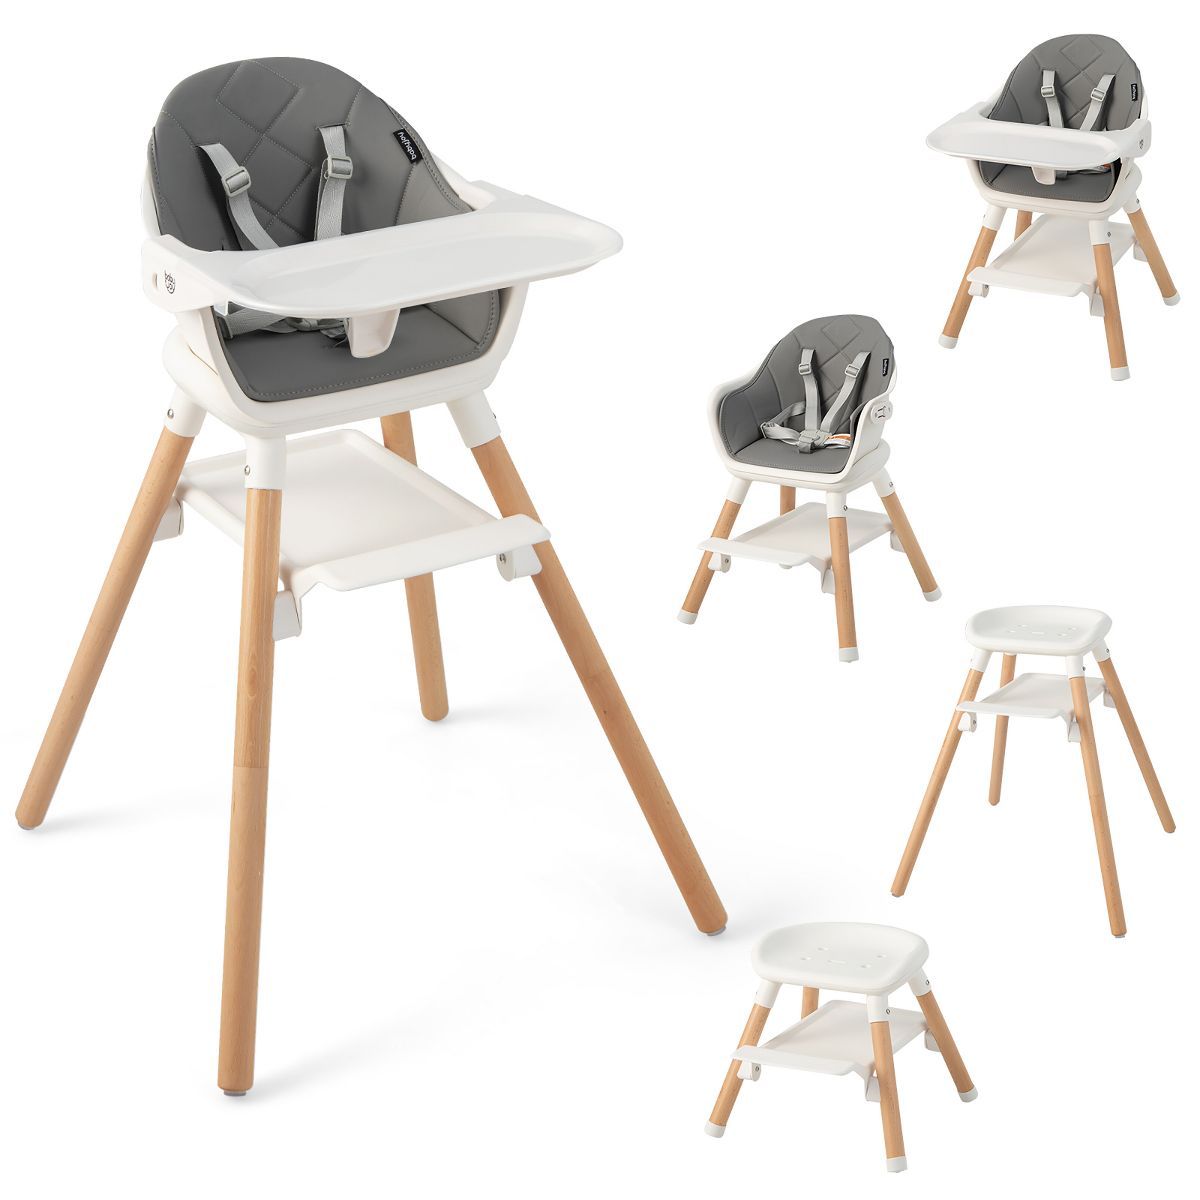 Costway 6-in-1 Convertible Wooden Baby Highchair Infant Feeding Chair with Removable Tray | Target